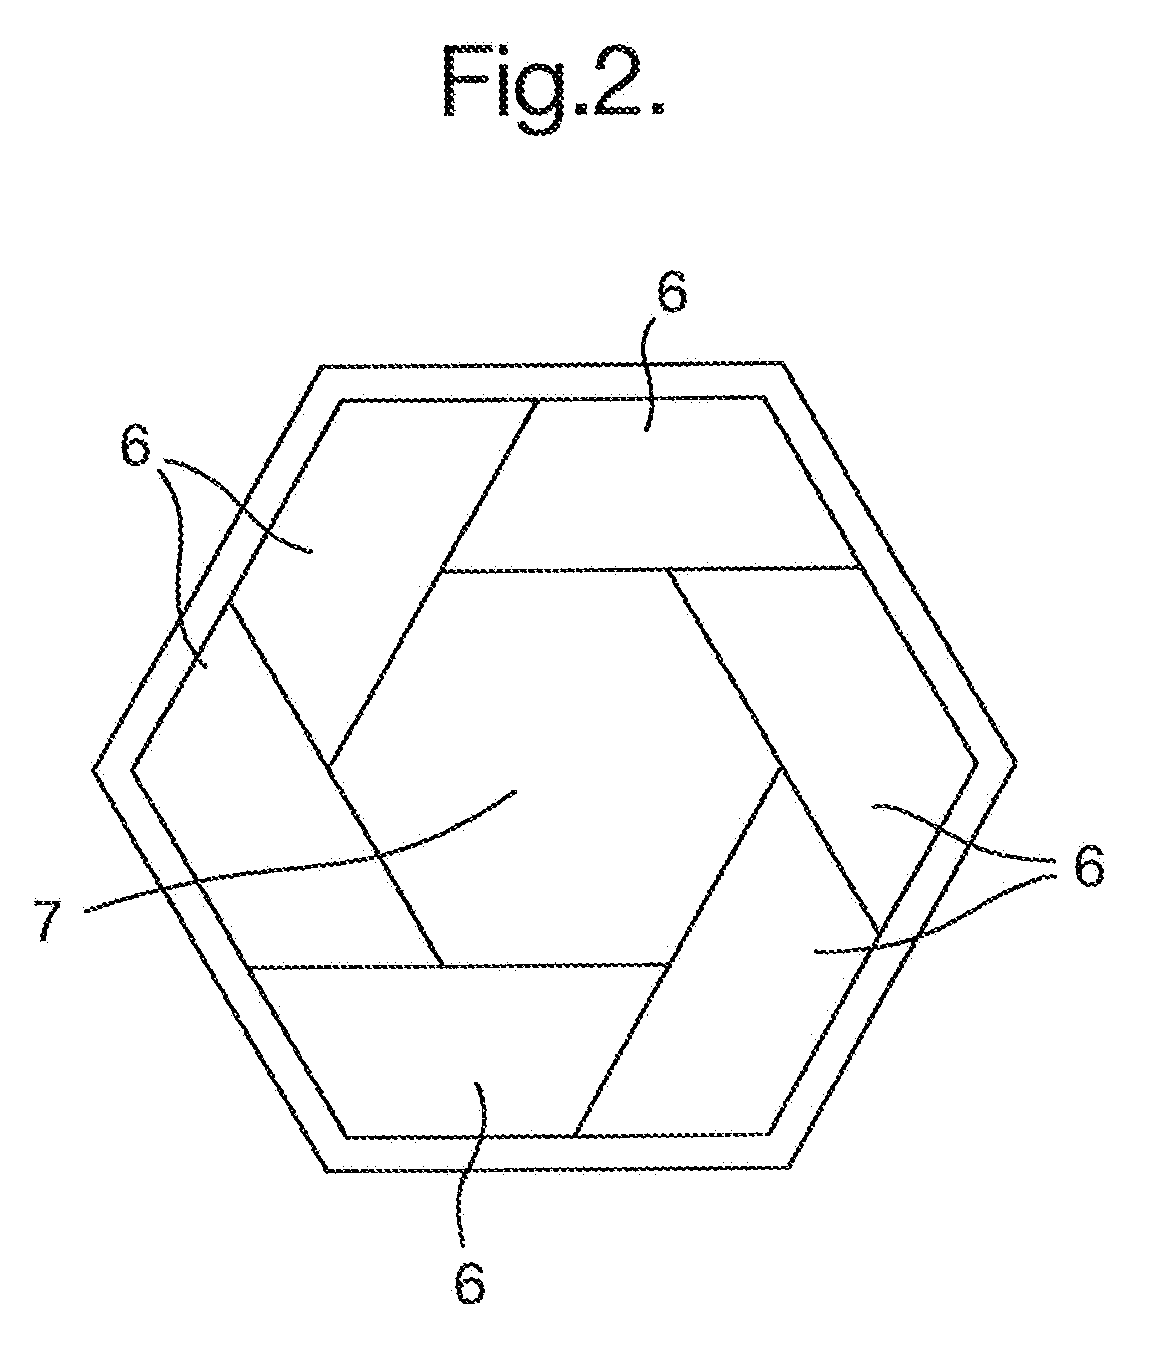 Process for producing frozen confectionery products